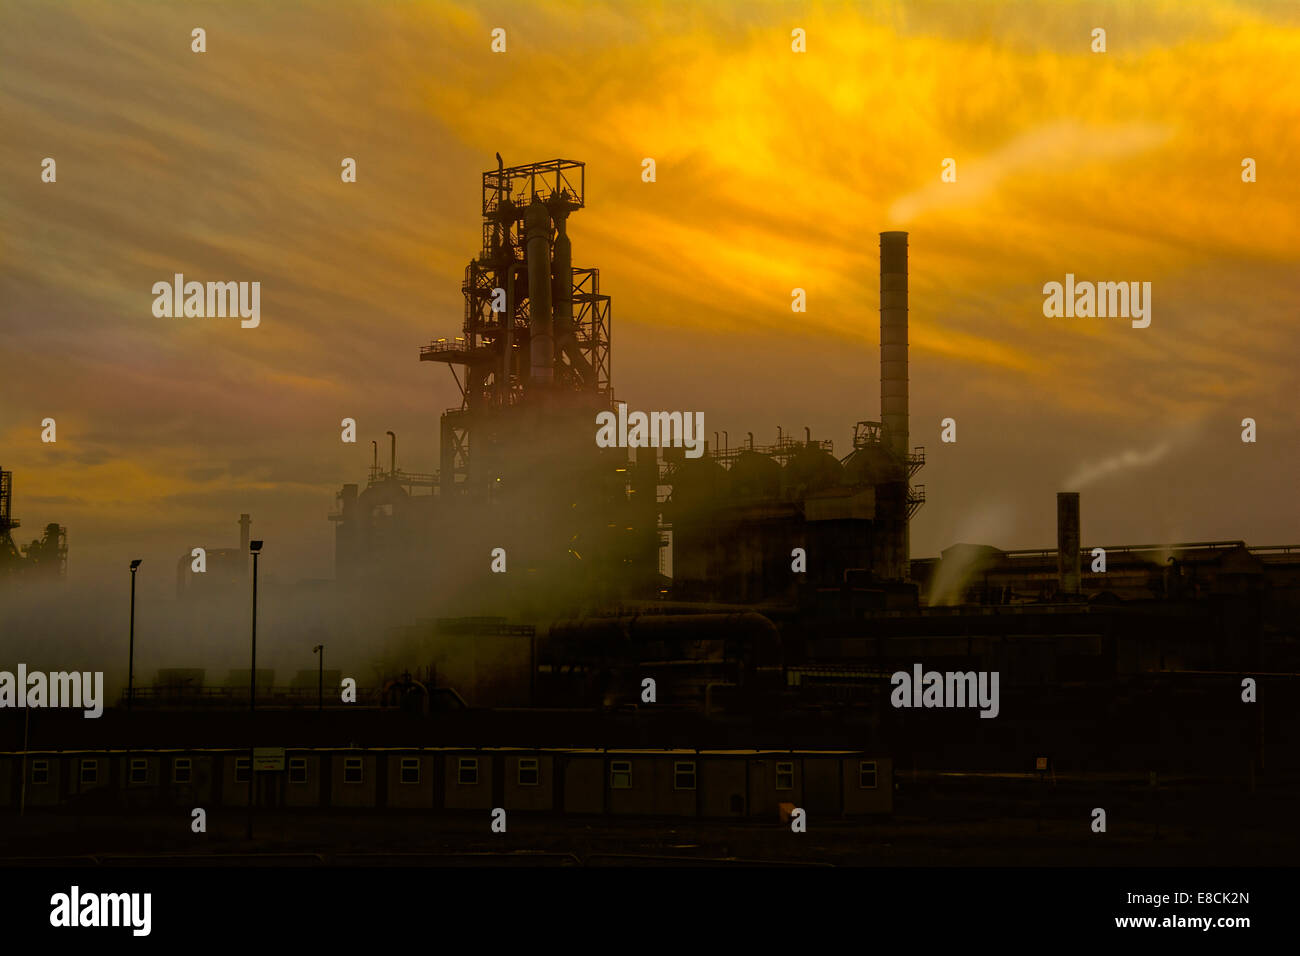 Port Talbot steelworks at sunset. Industrial landscape. Stock Photo